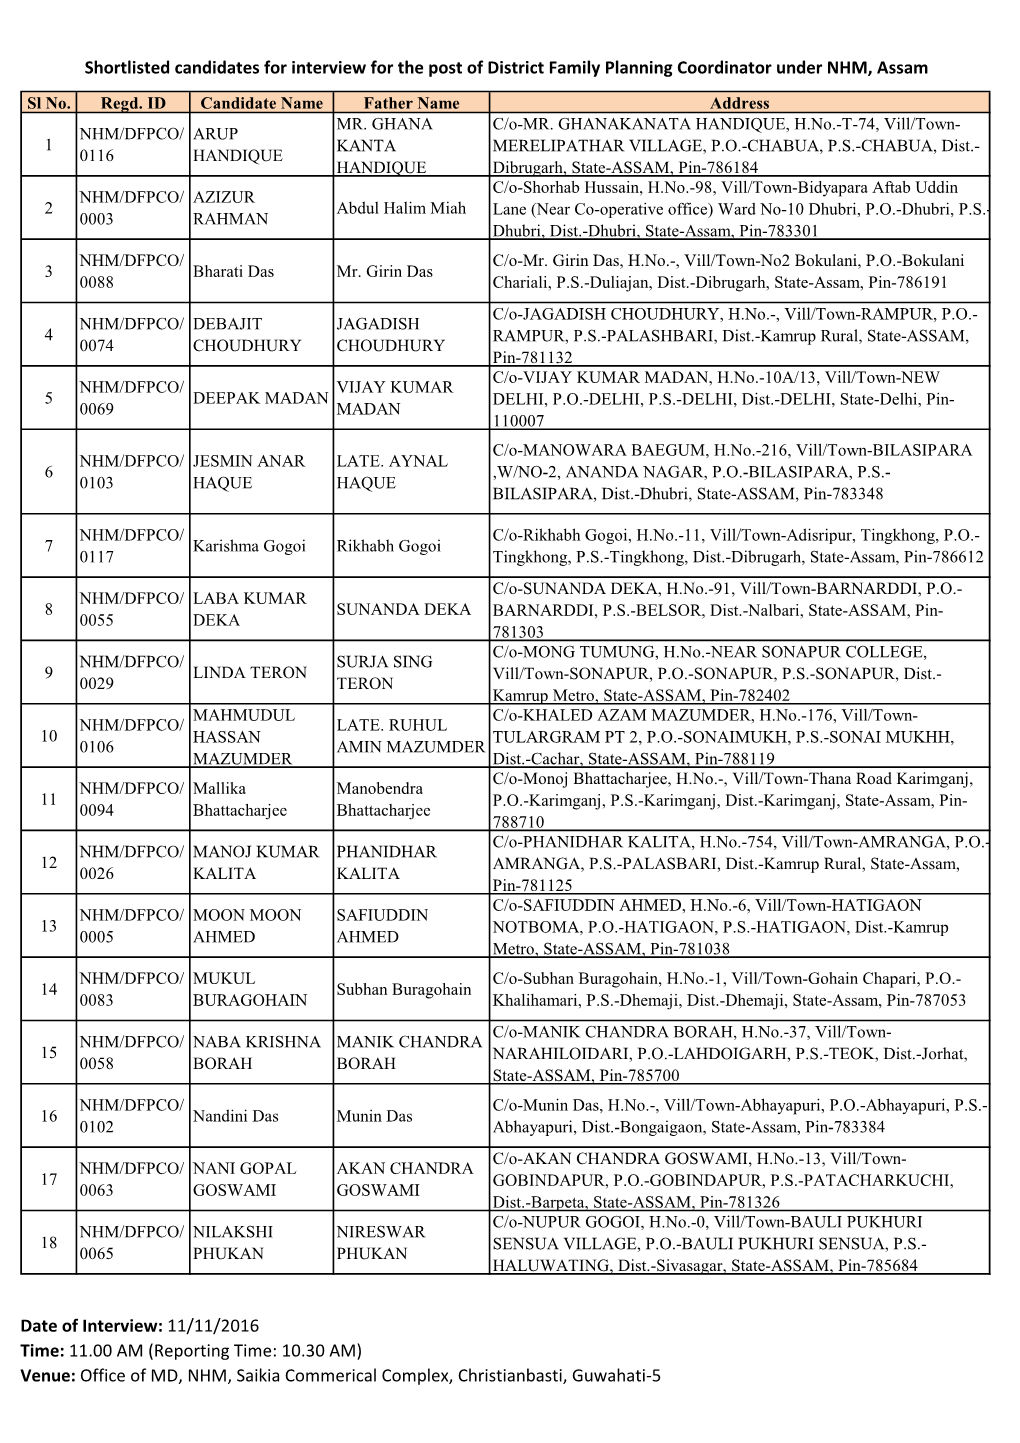 Shortlisted Candidates for Interview for the Post of District Family Planning Coordinator Under NHM, Assam